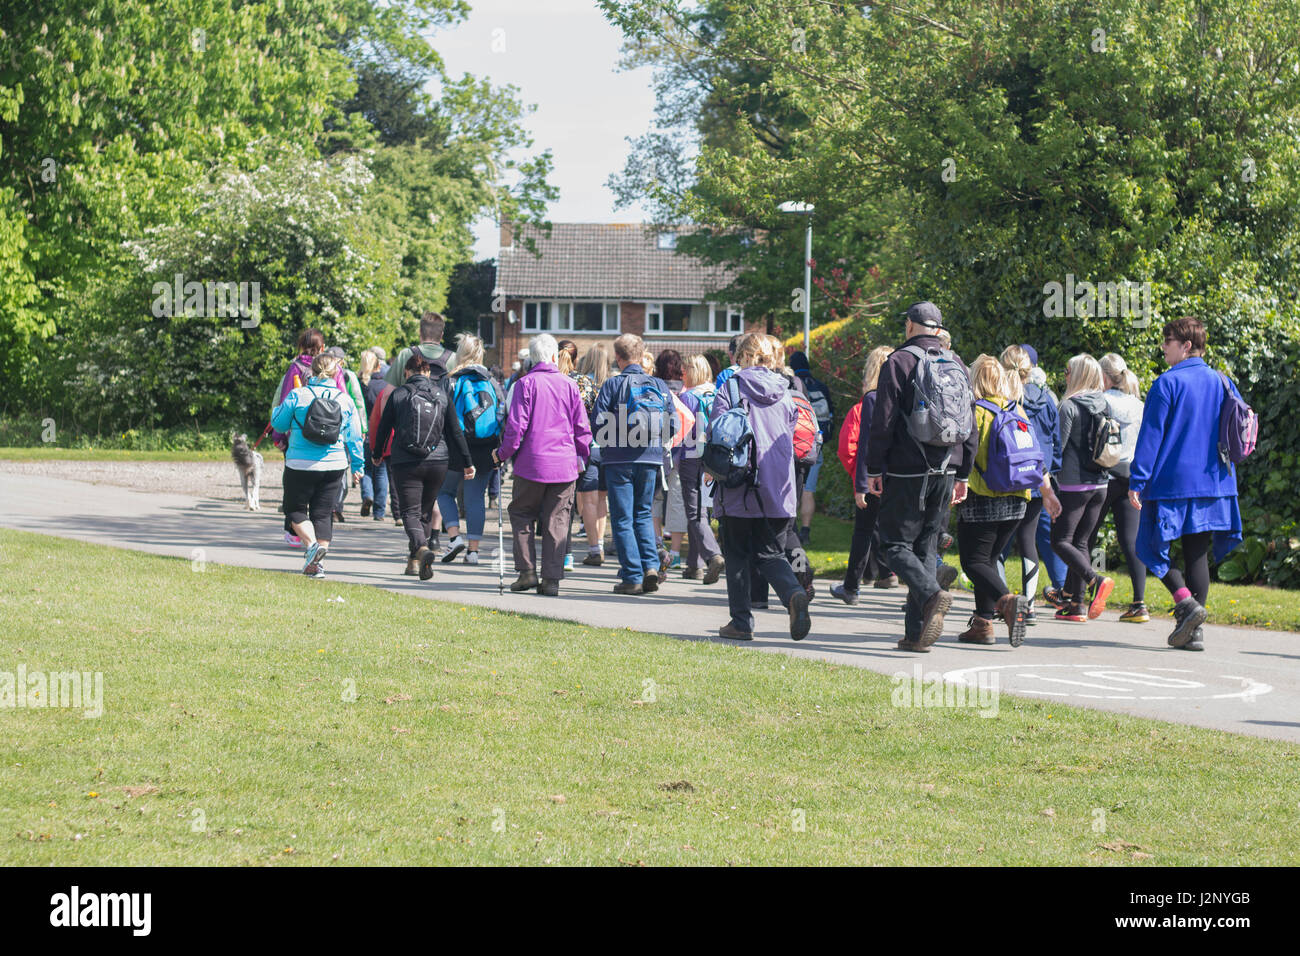 Cottingham, UK. 30th Apr, 2017. Dove House Sponsored Walk - raising money to support Dove House Hospice, a charity caring for terminally ill patients. Credit: Matthew Appleyard/Alamy Live News Stock Photo